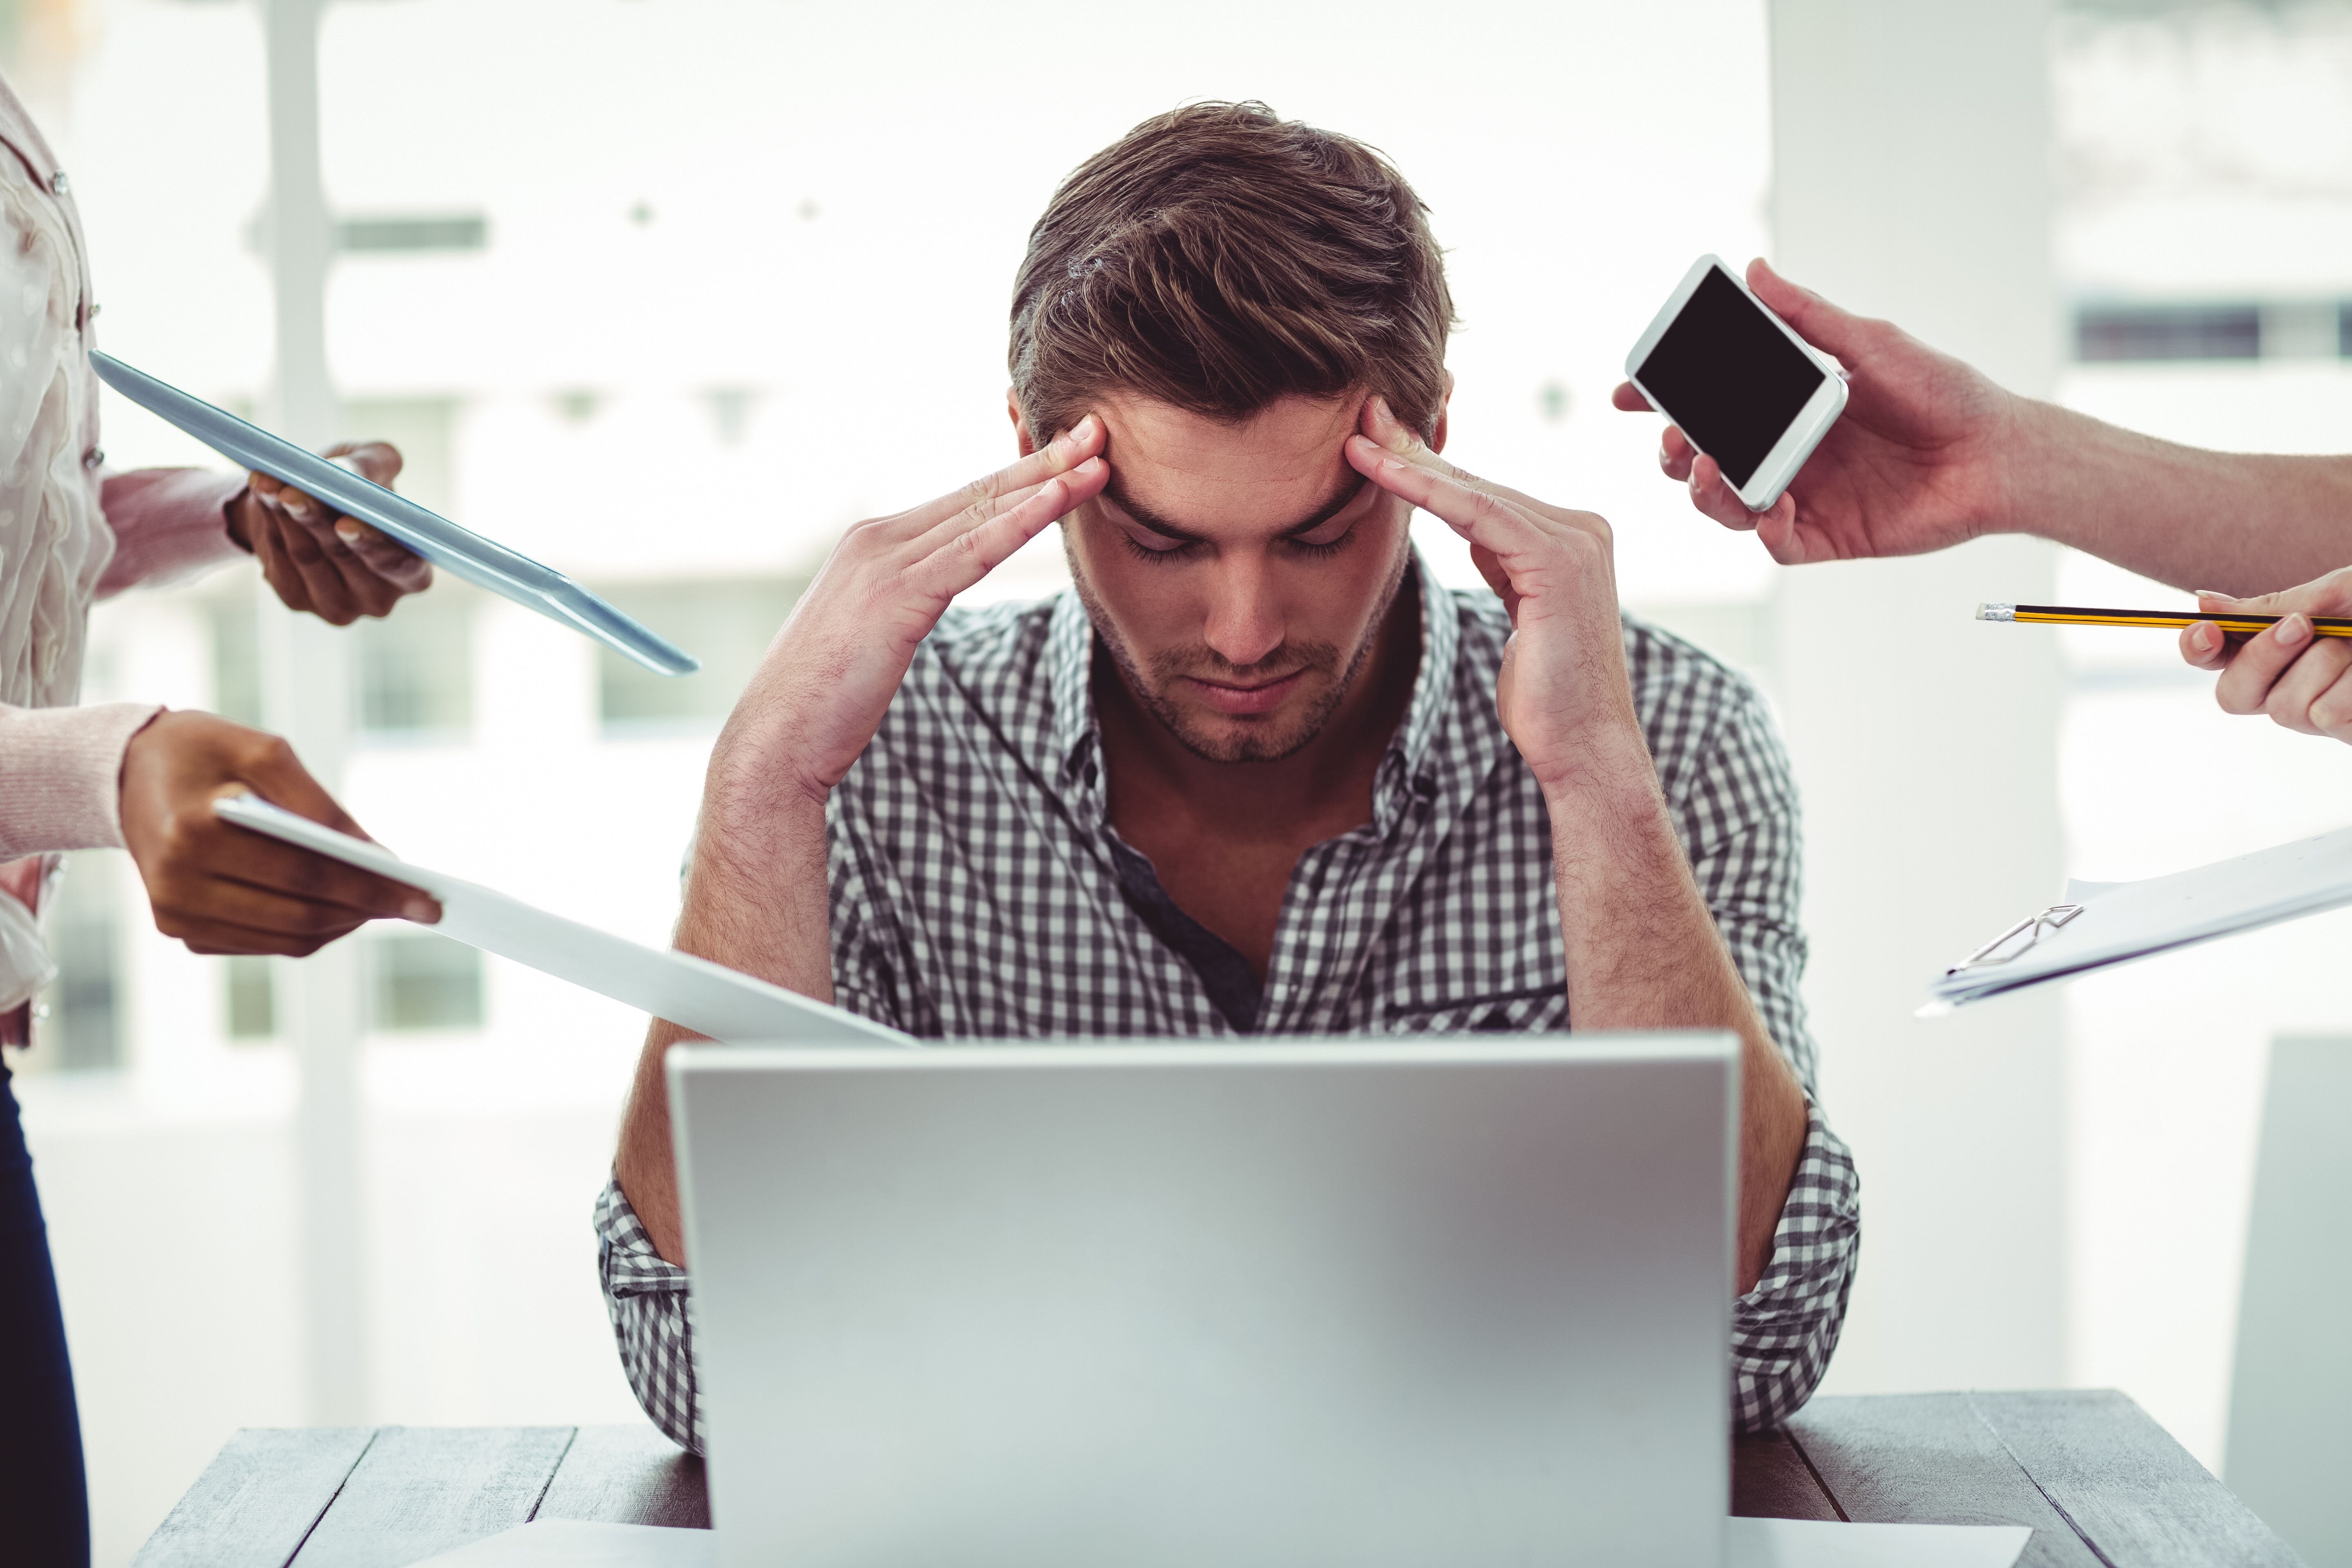 A man looks stressed at work. | Source: Shutterstock